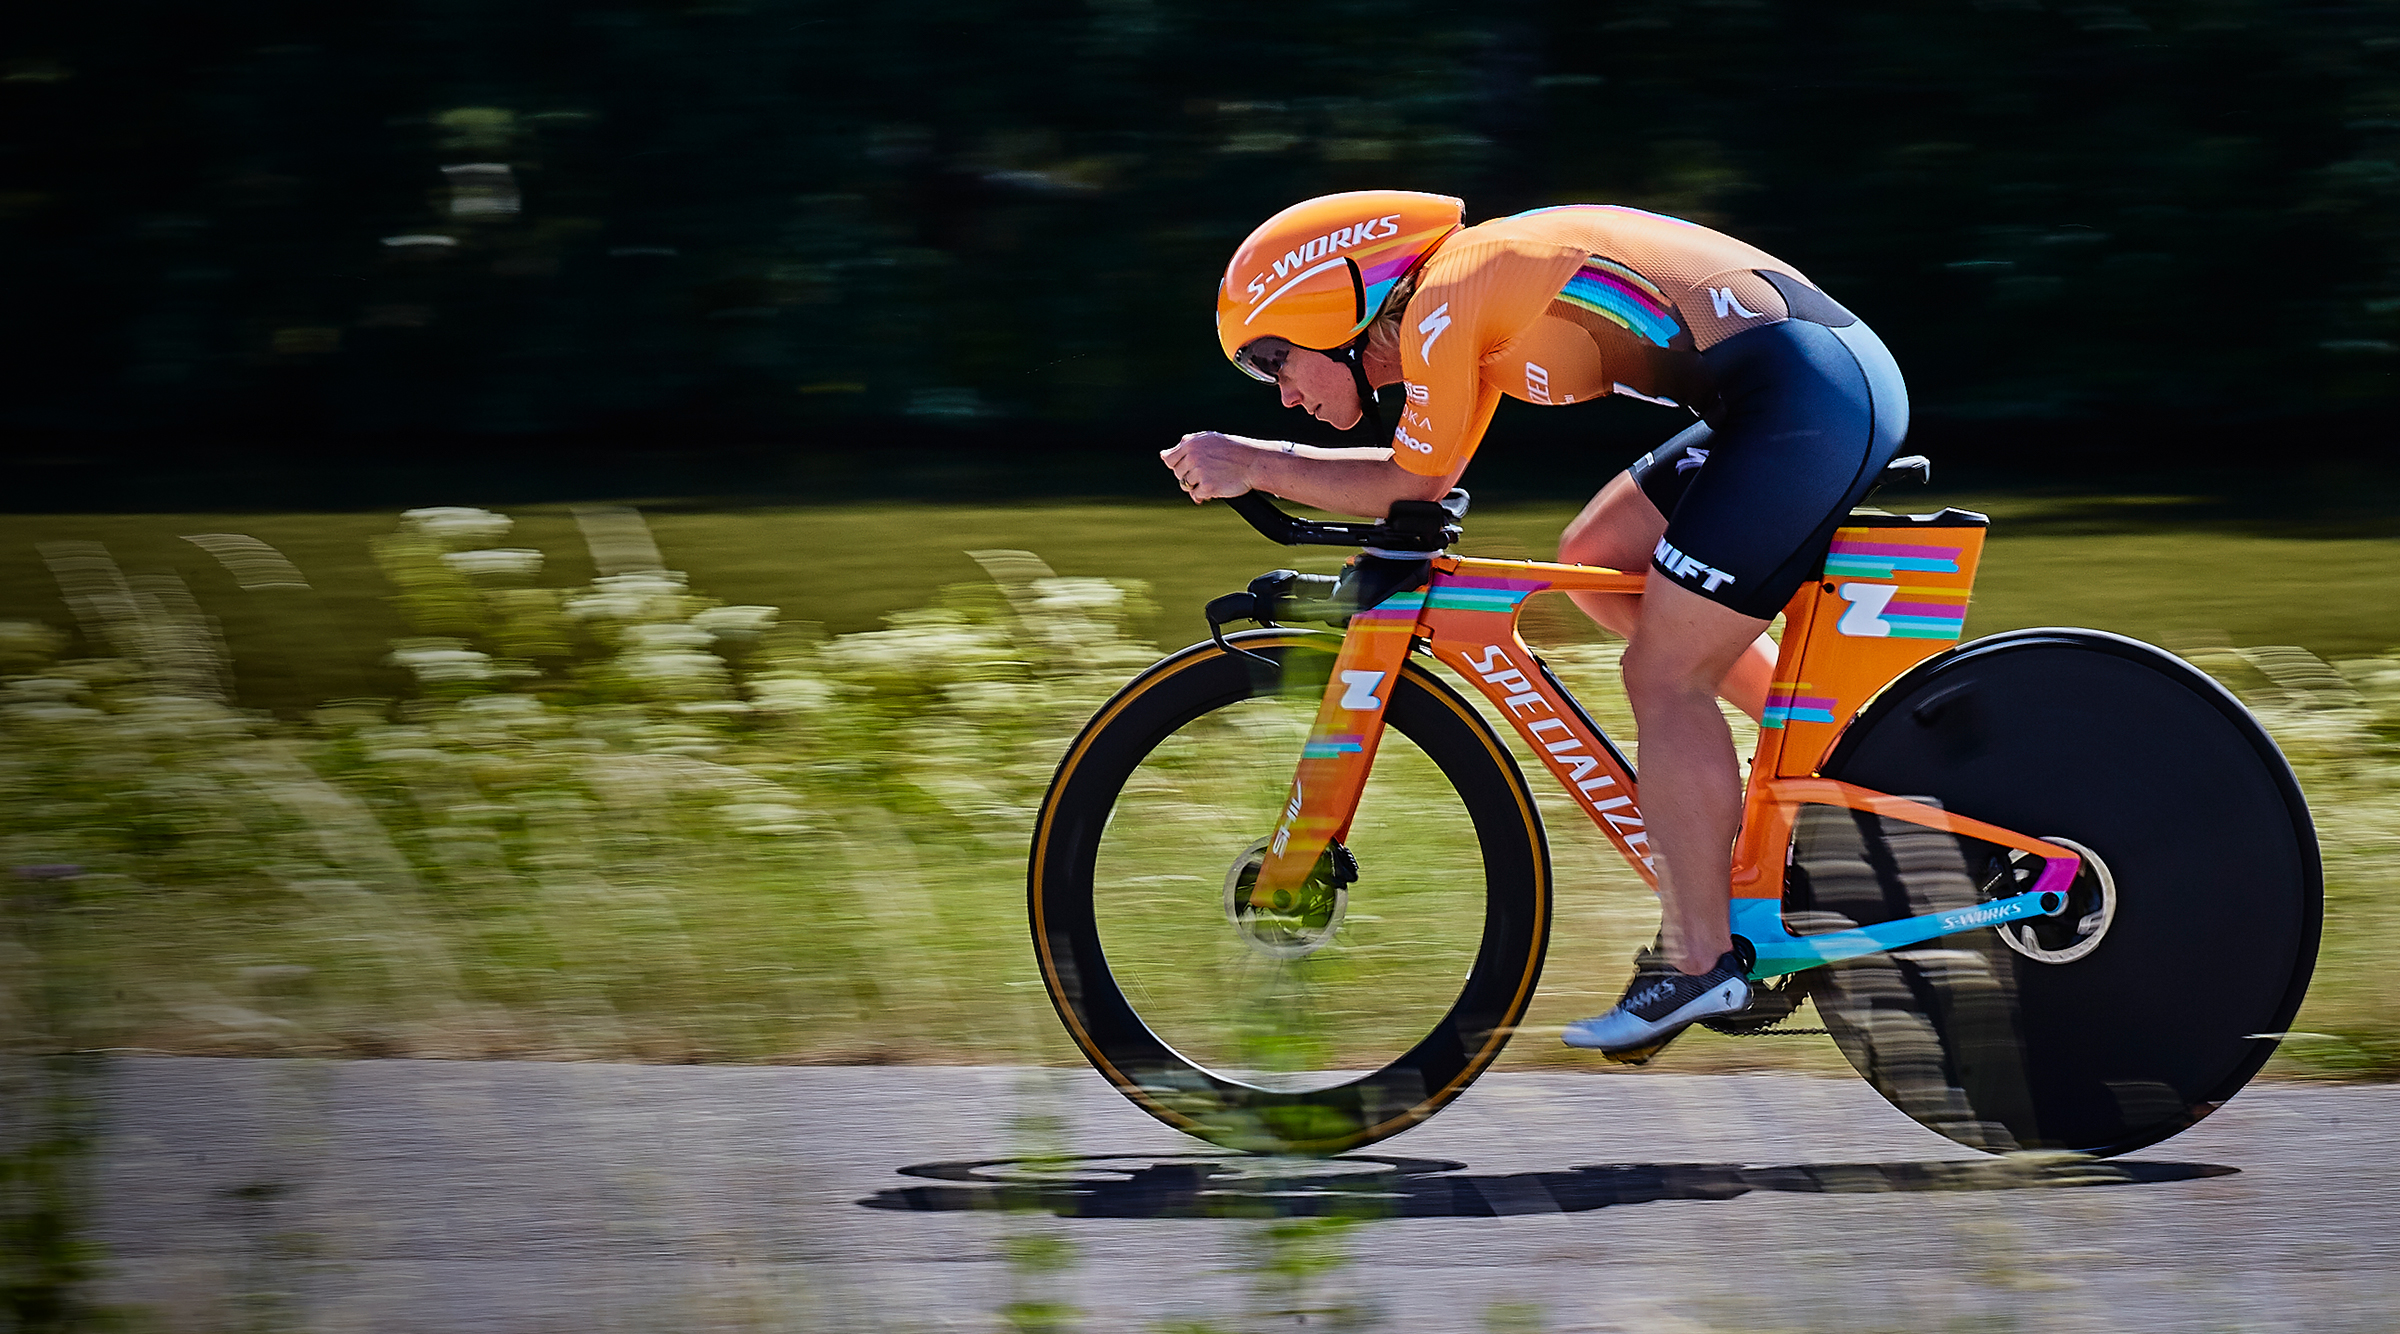 Enroll in Zwift Academy Tri now, ride Ironman World Championships in Kona later?